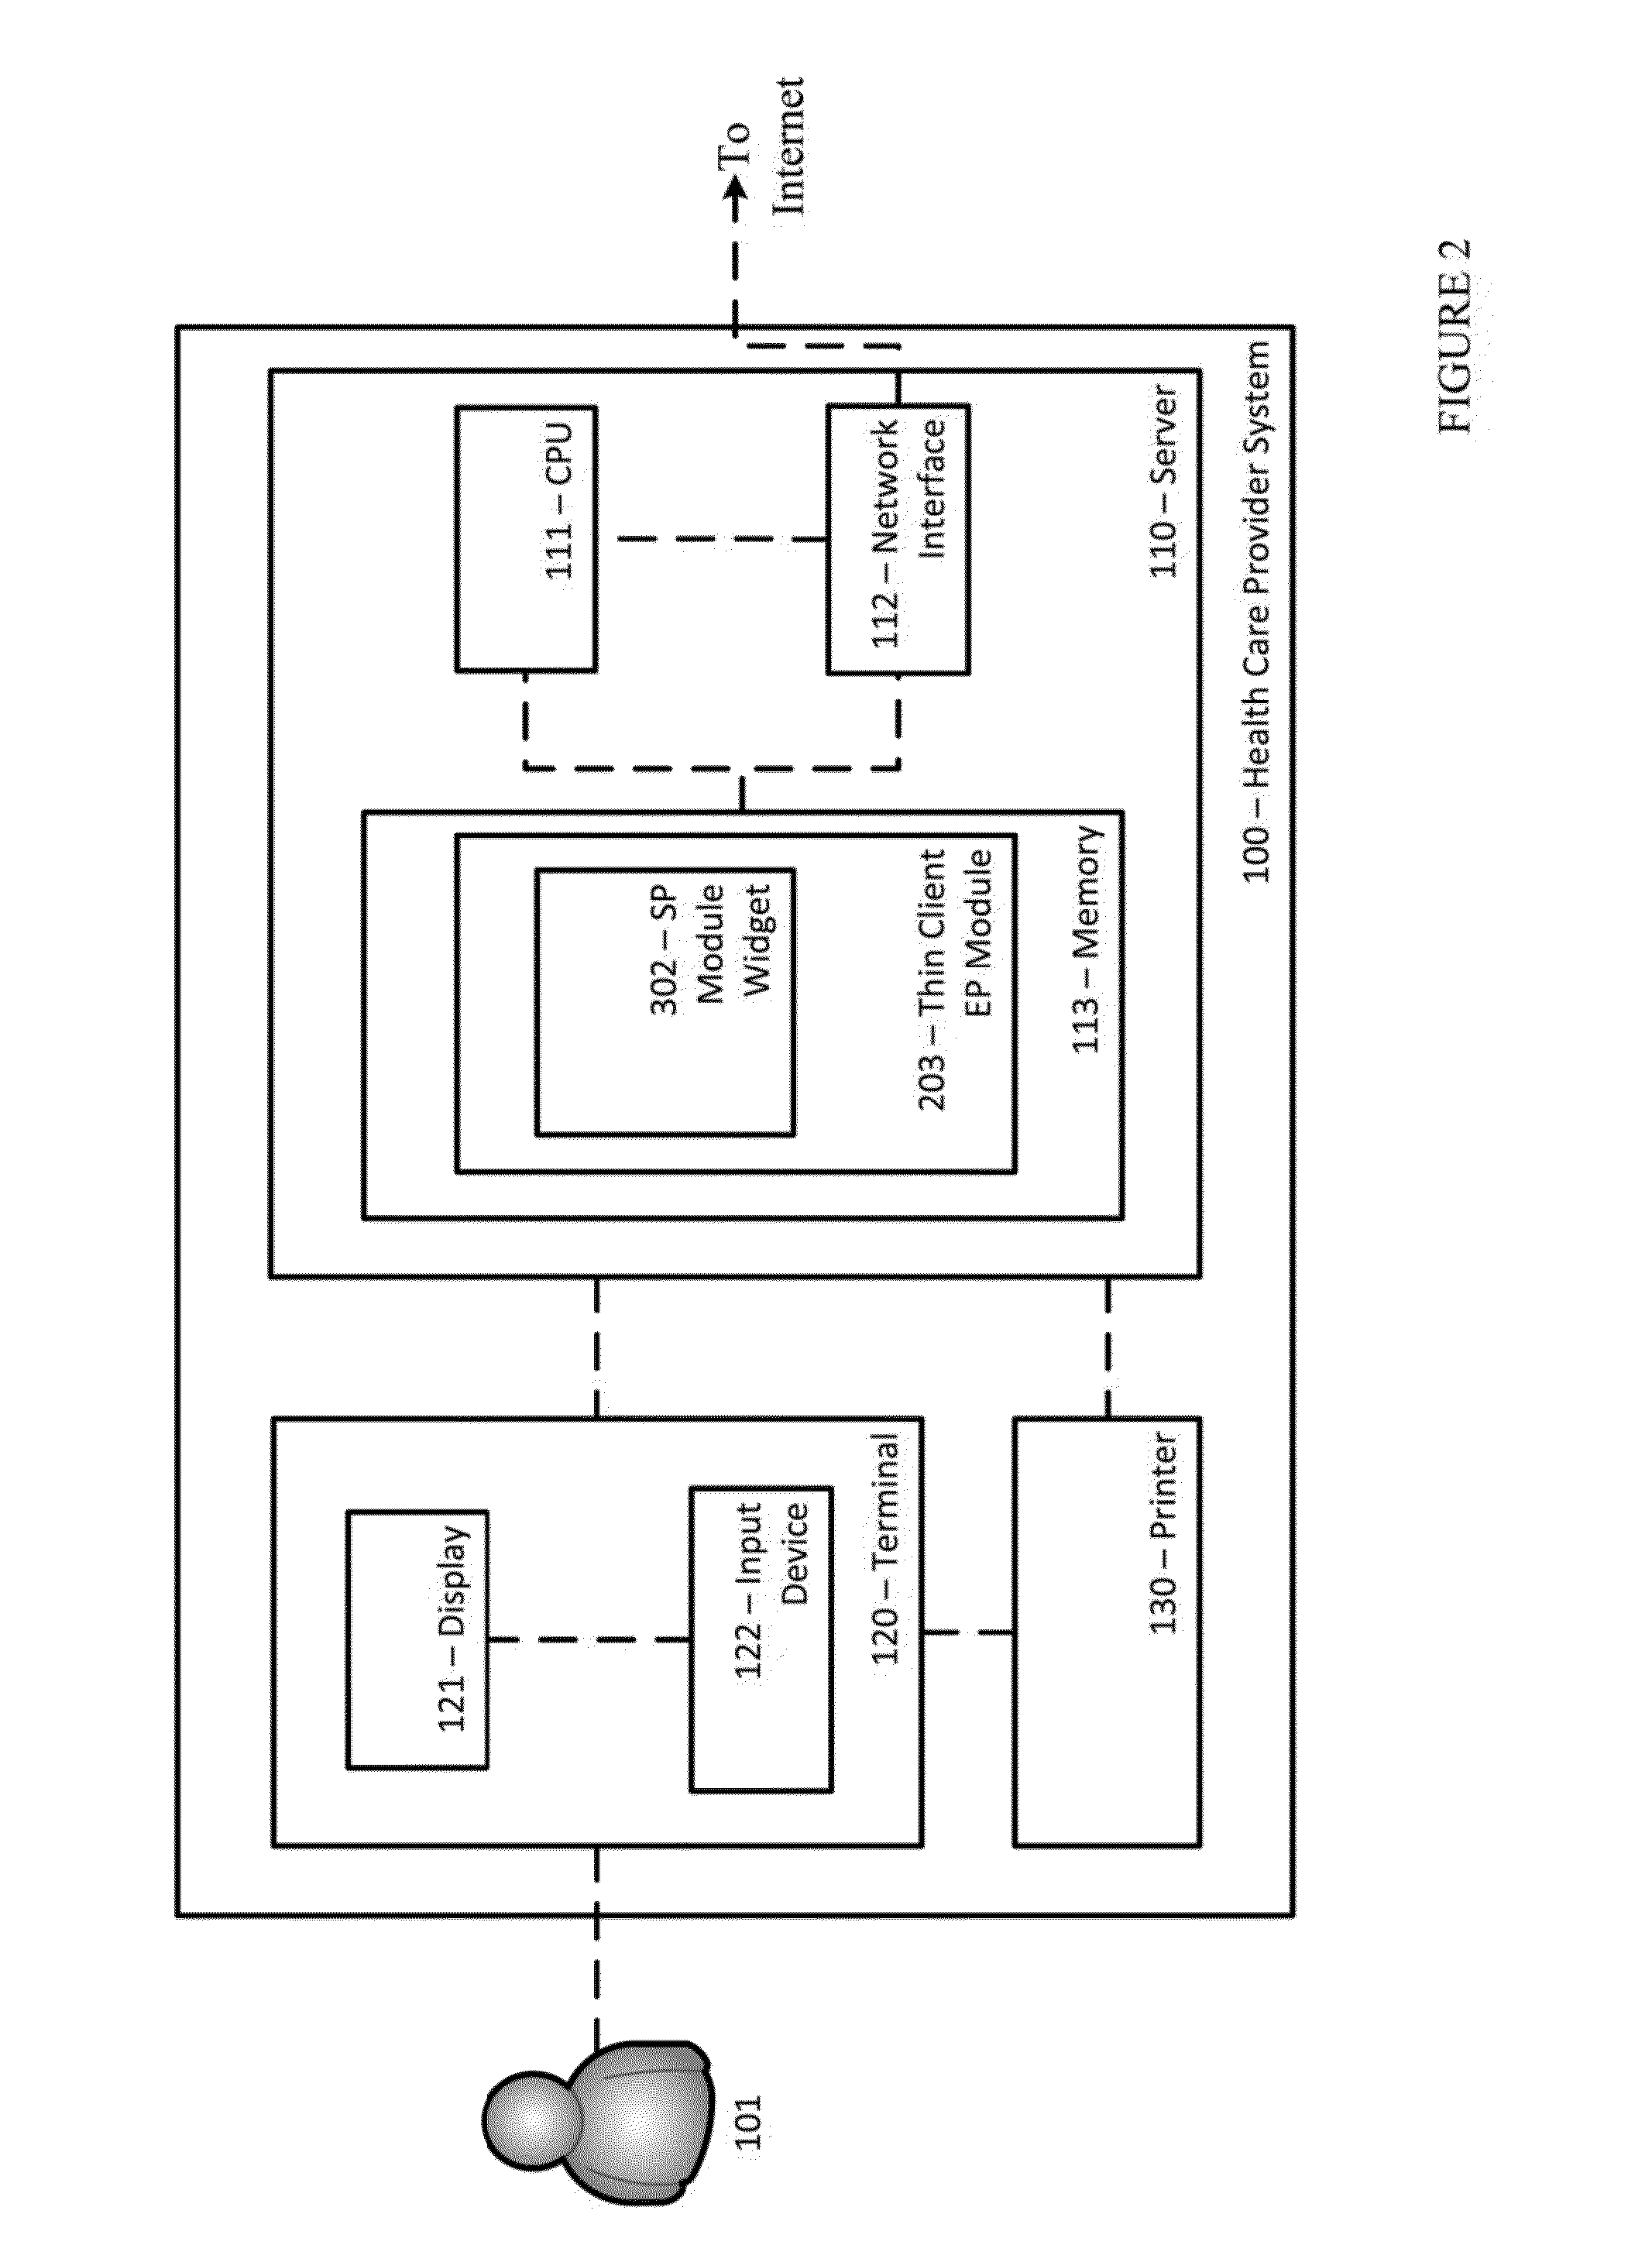 Systems and Methods for Supplementing Patient and Provider Interactions to Increase Patient Adherence